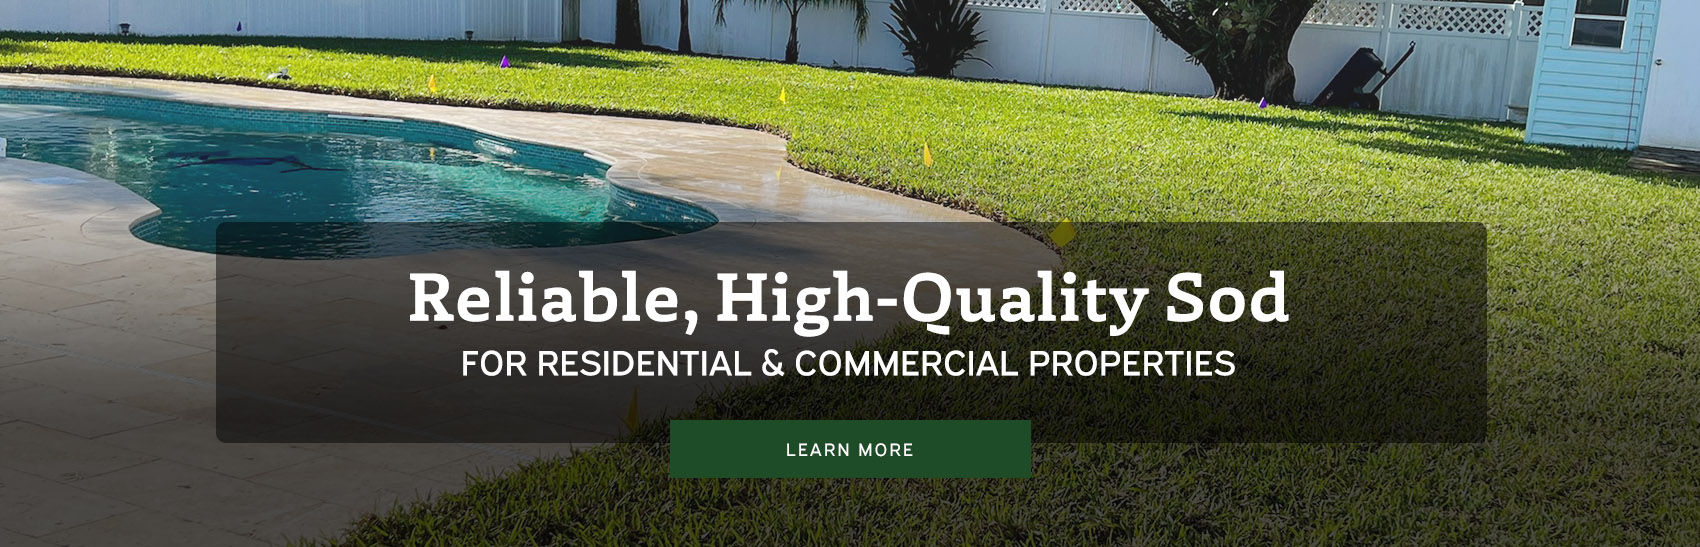 Learn more about trusted providers of sod New Smyrna Beach residents put their trust in.